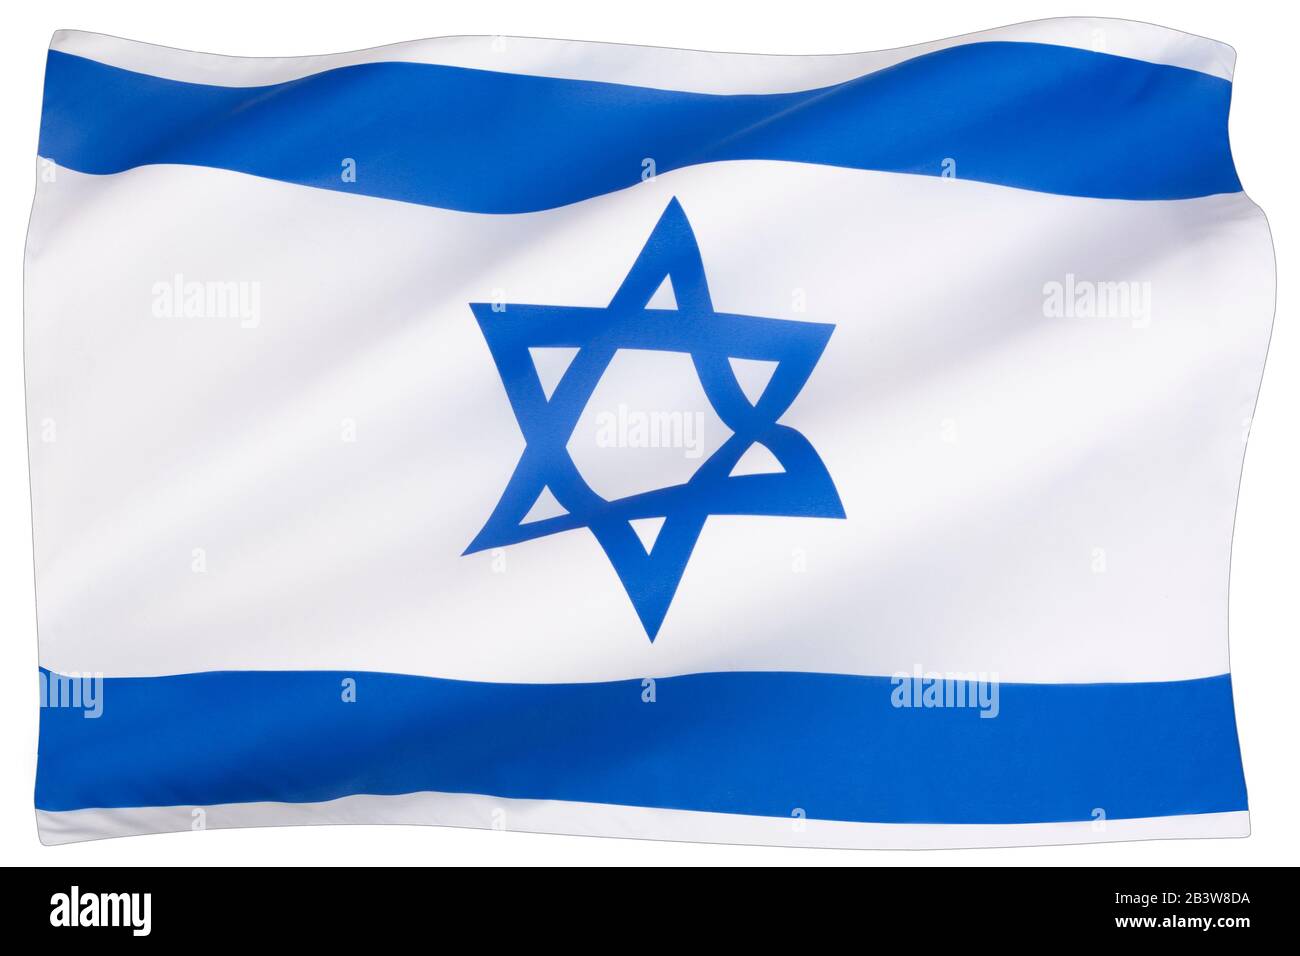 The national flag of Israel - adopted on 28 October 1948, five months after the establishment of the State of Israel. Stock Photo